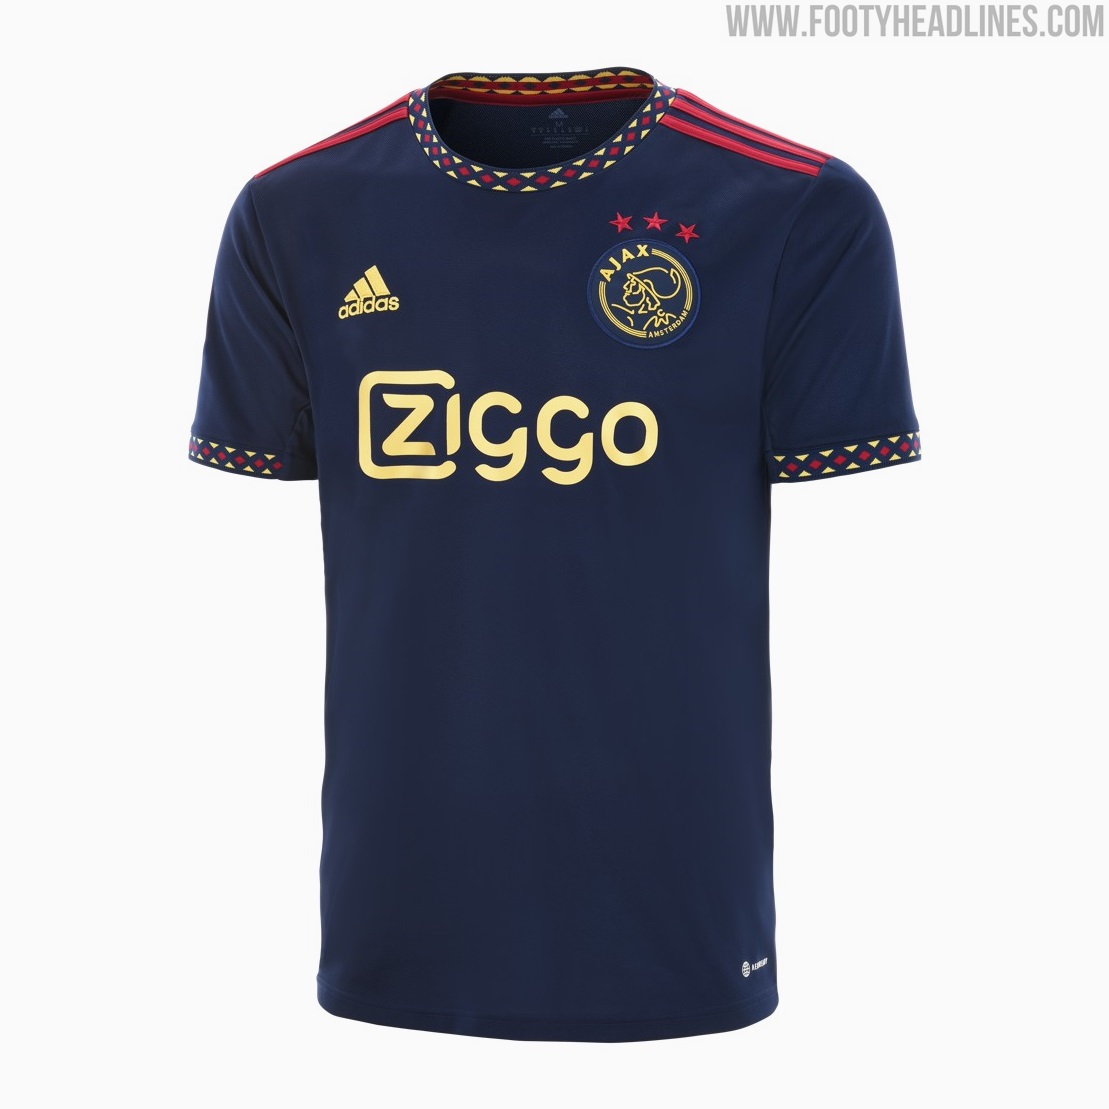 New Ajax Away Kit 2020-21, Adidas unveil blue alternate jersey for  Amsterdam outfit